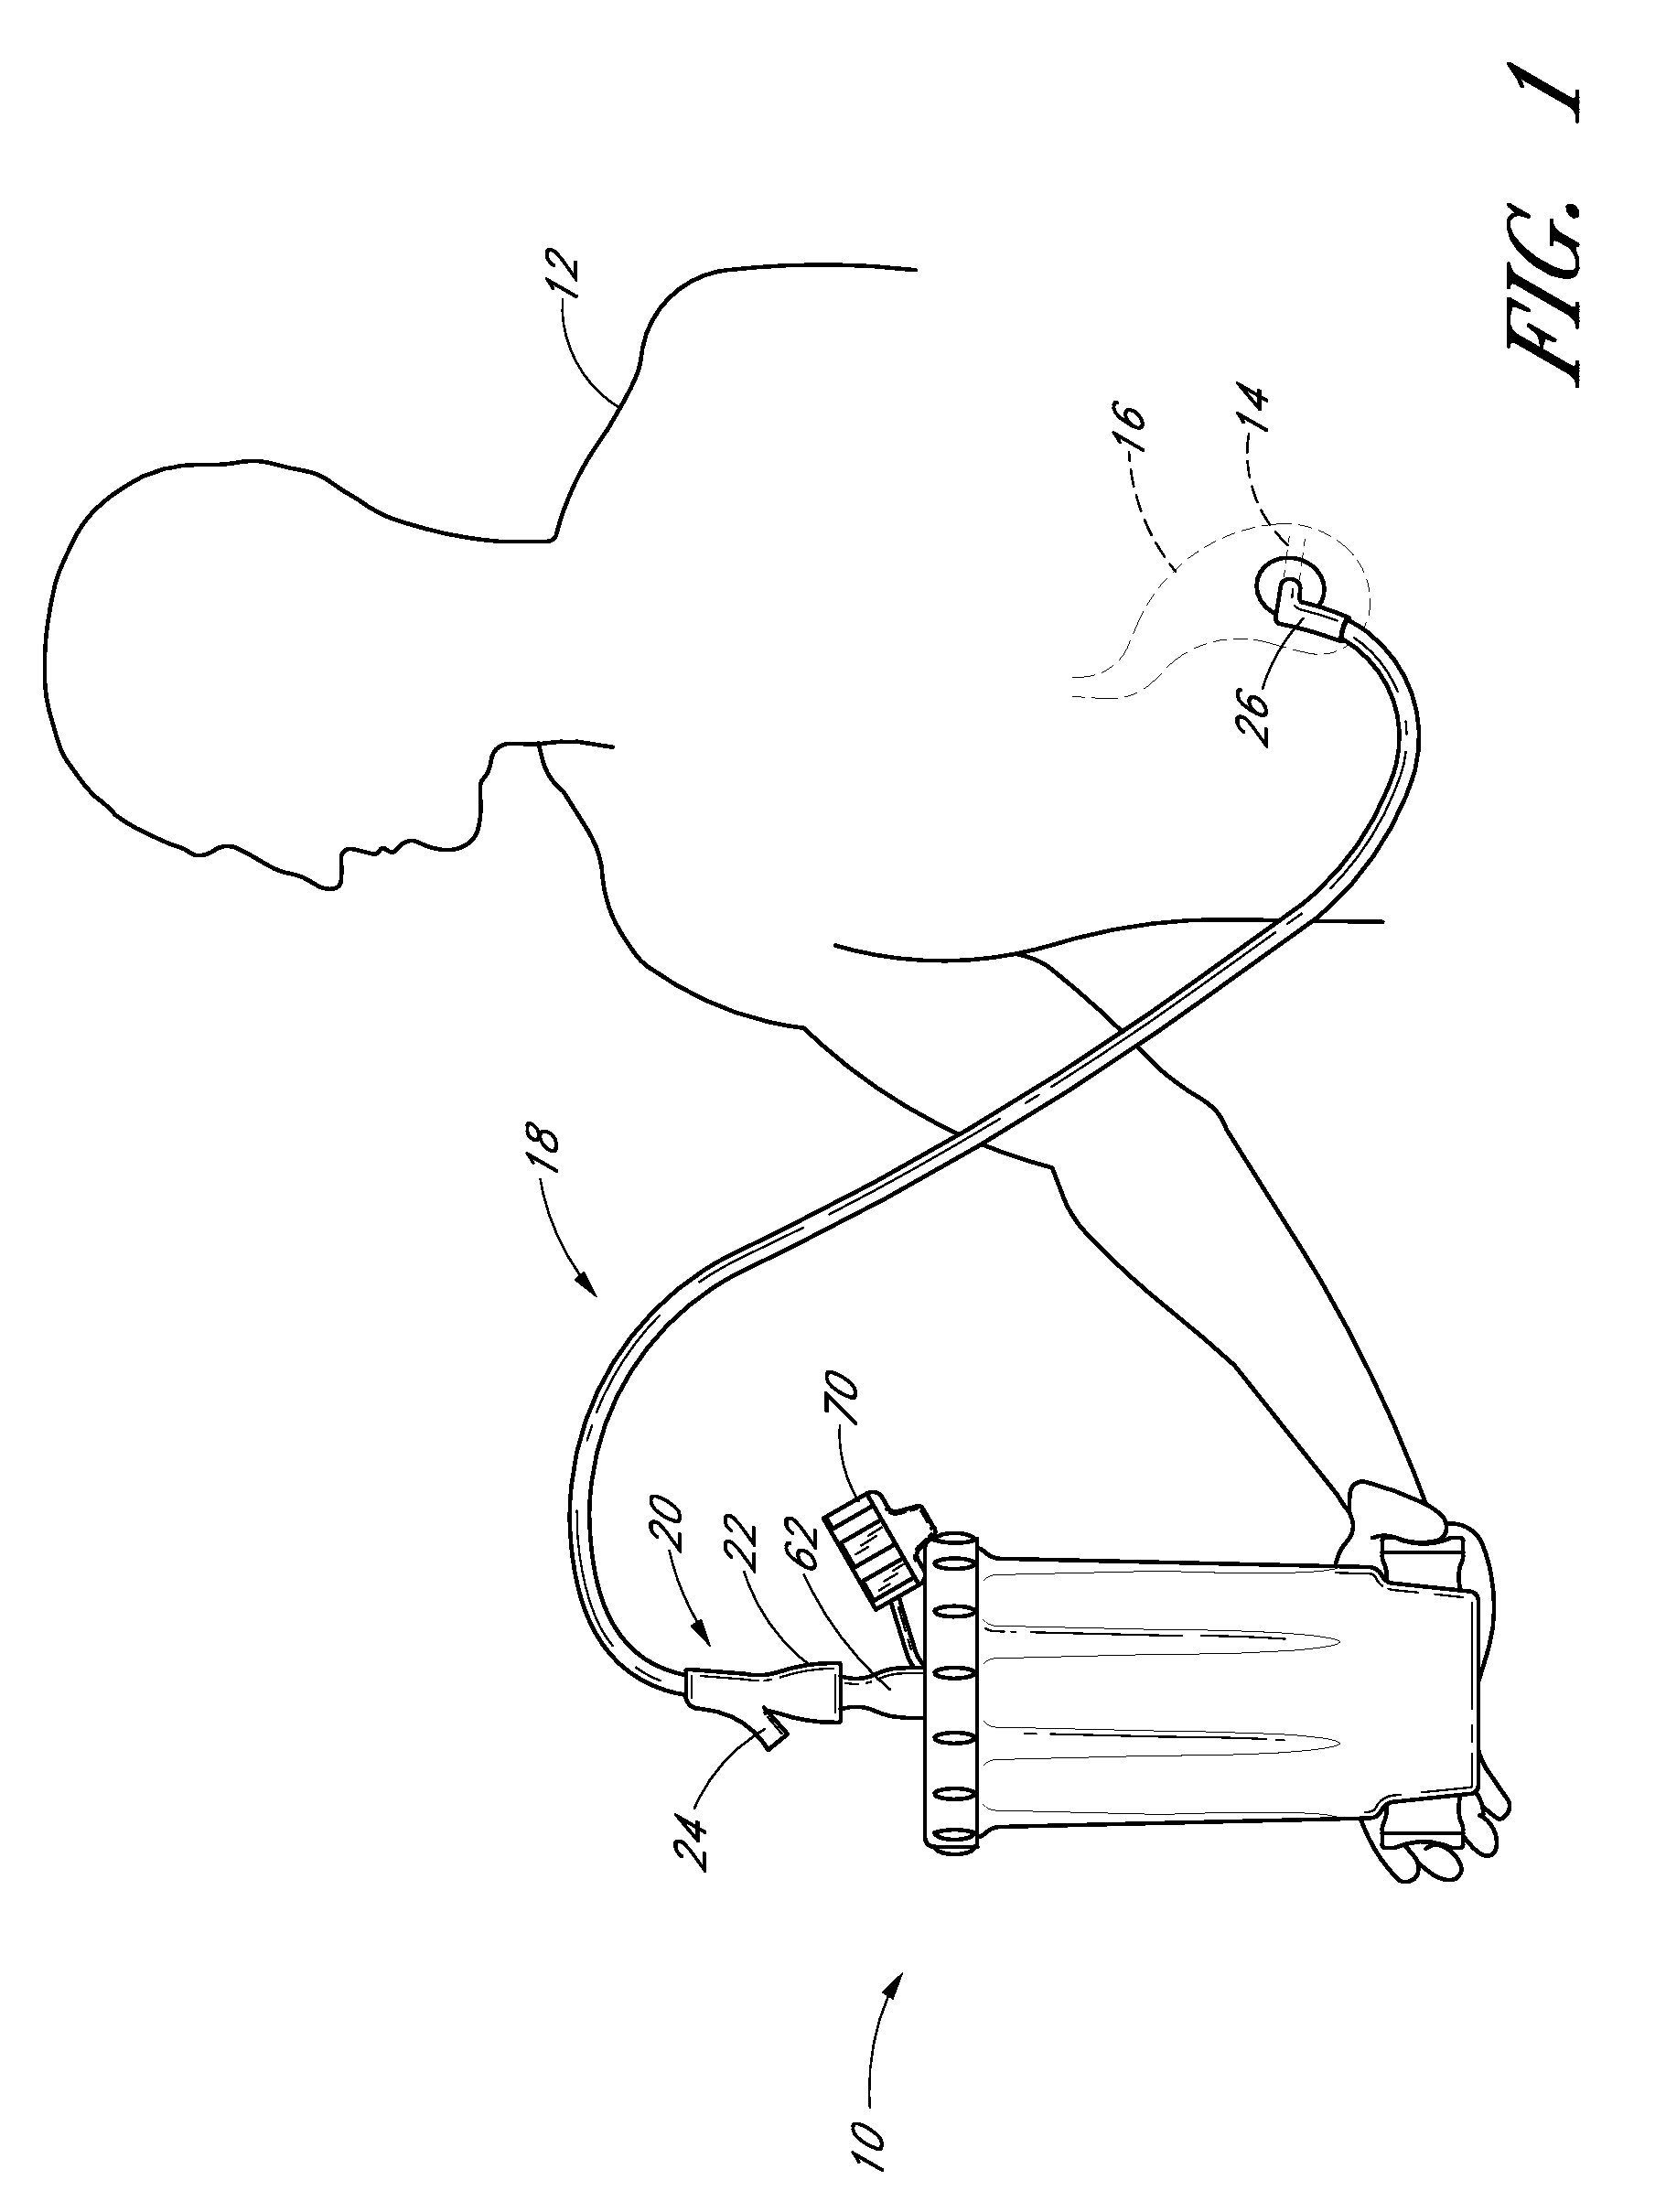 Enteral feeding systems, devices and methods